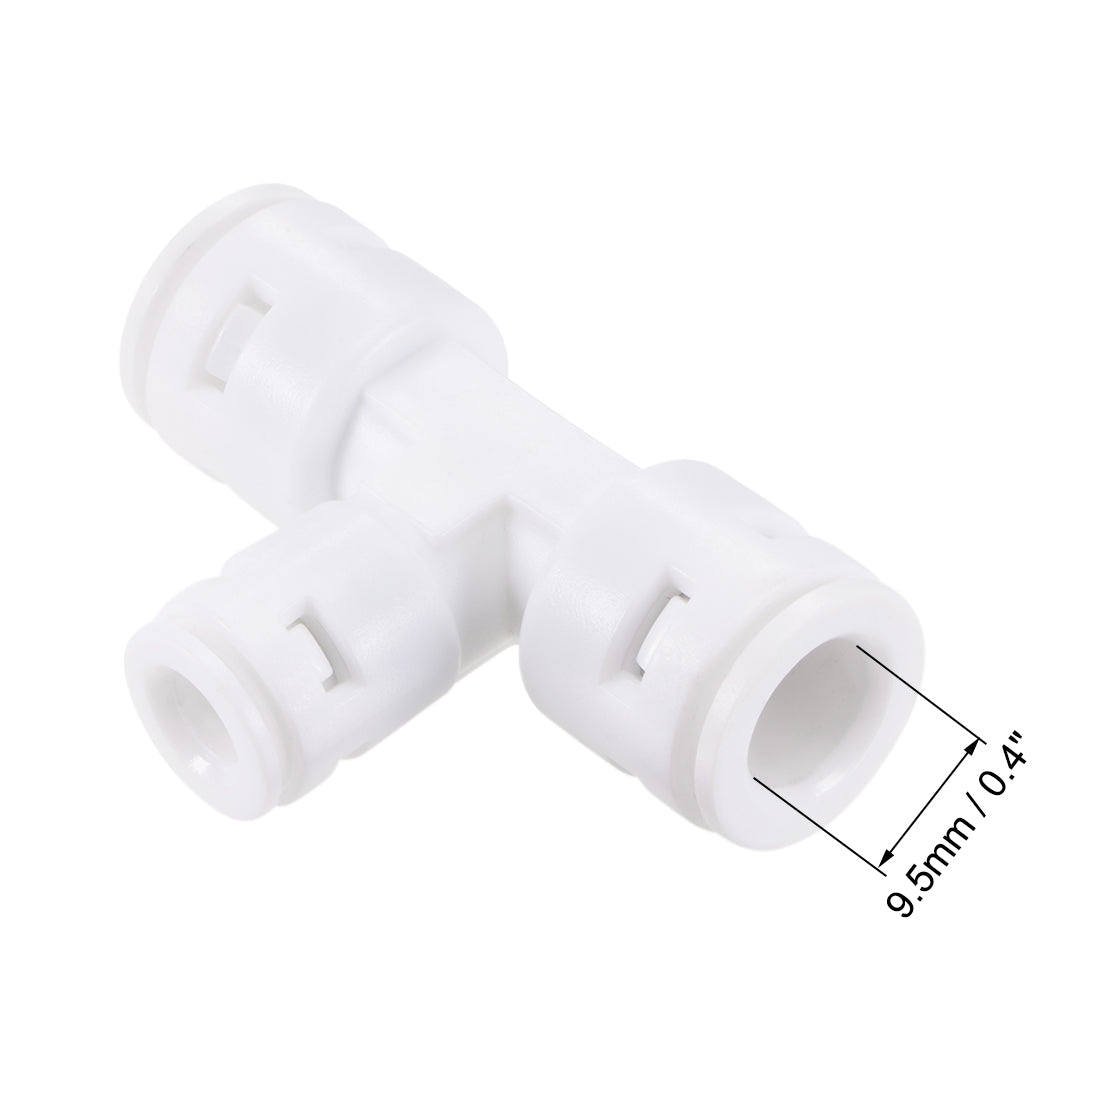 uxcell Uxcell Quick Connector 3 Way T Type 3/8"x3/8"x1/4" Push Fit Connect Fittings for RO Water Purifier, 54x35mm White 5Pcs